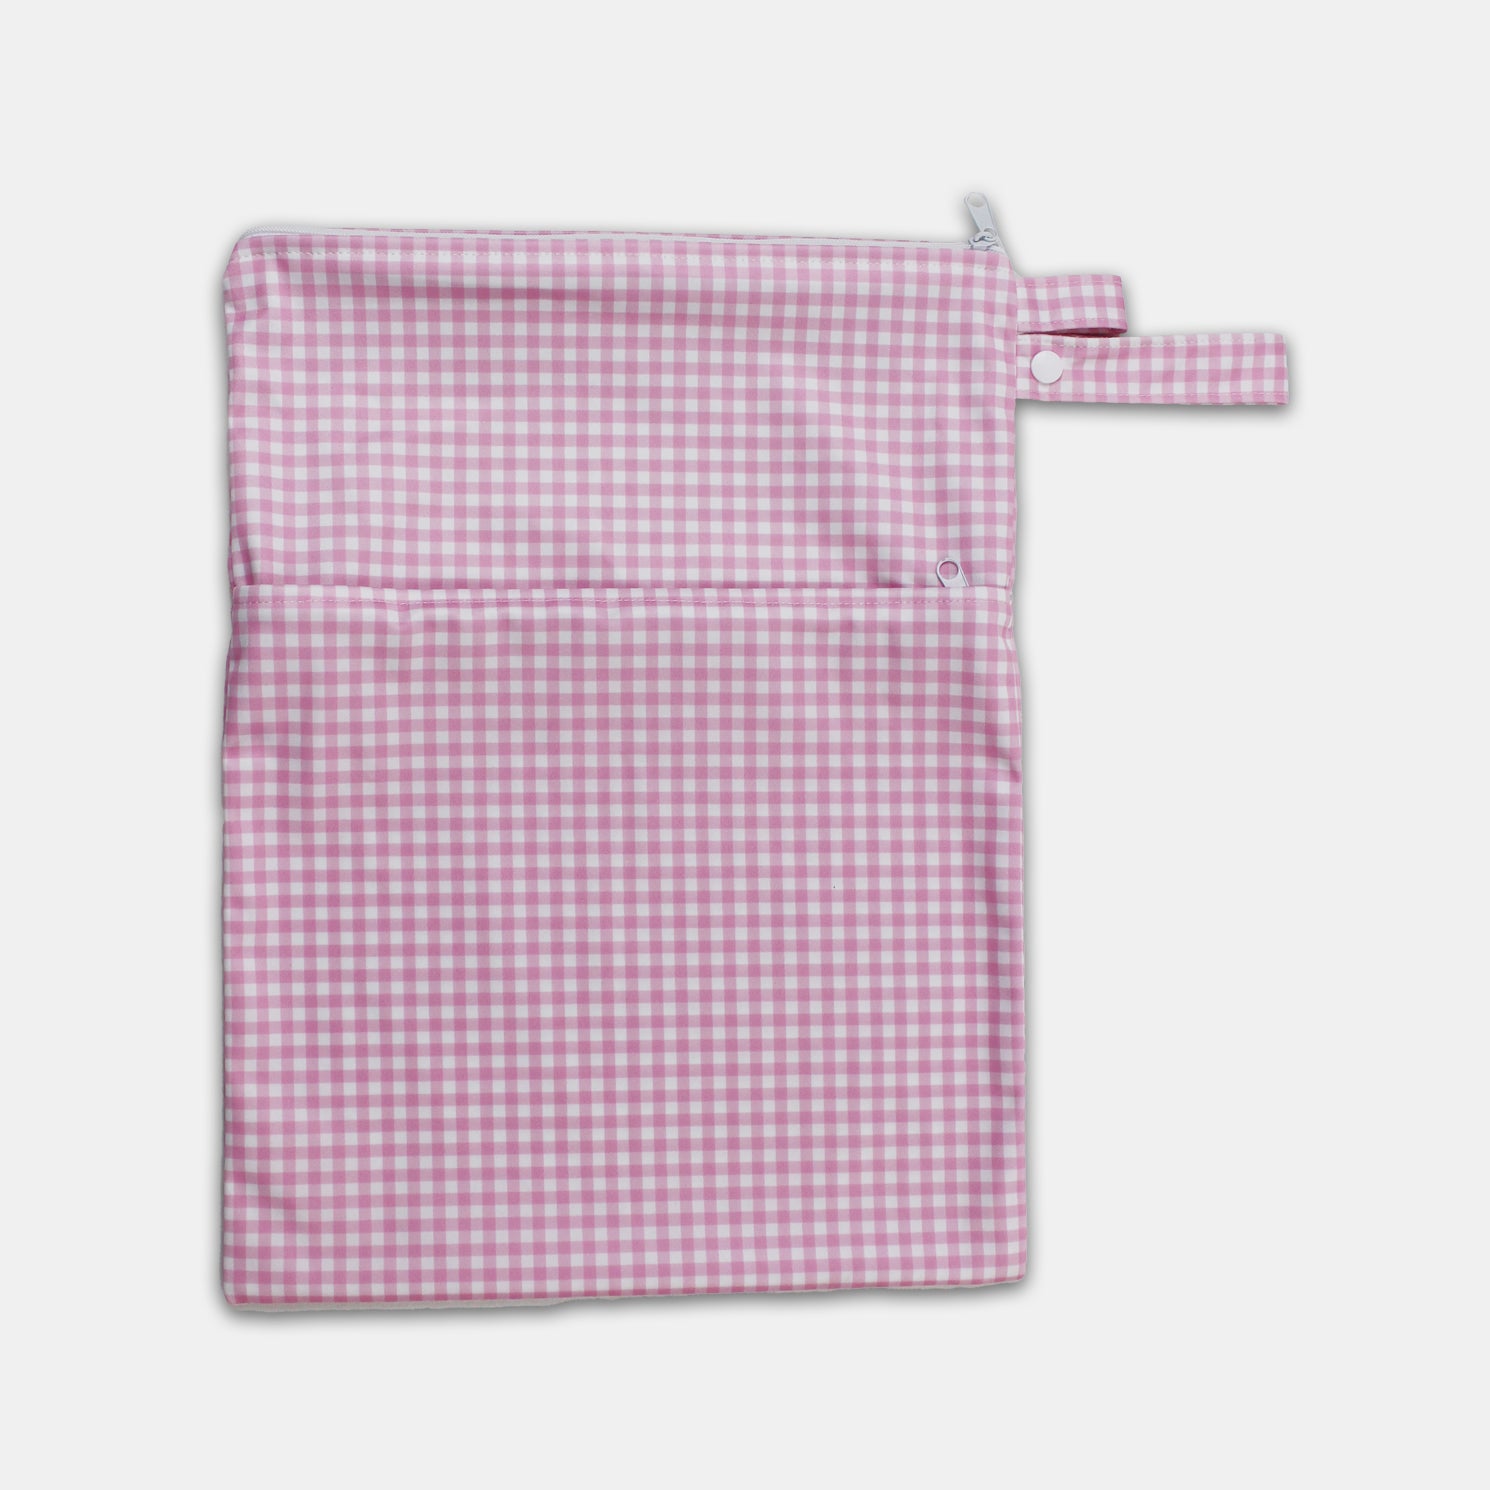 Tyoub Waterproof Stay-dry Zip Wet Bag– Pink White Gingham Check